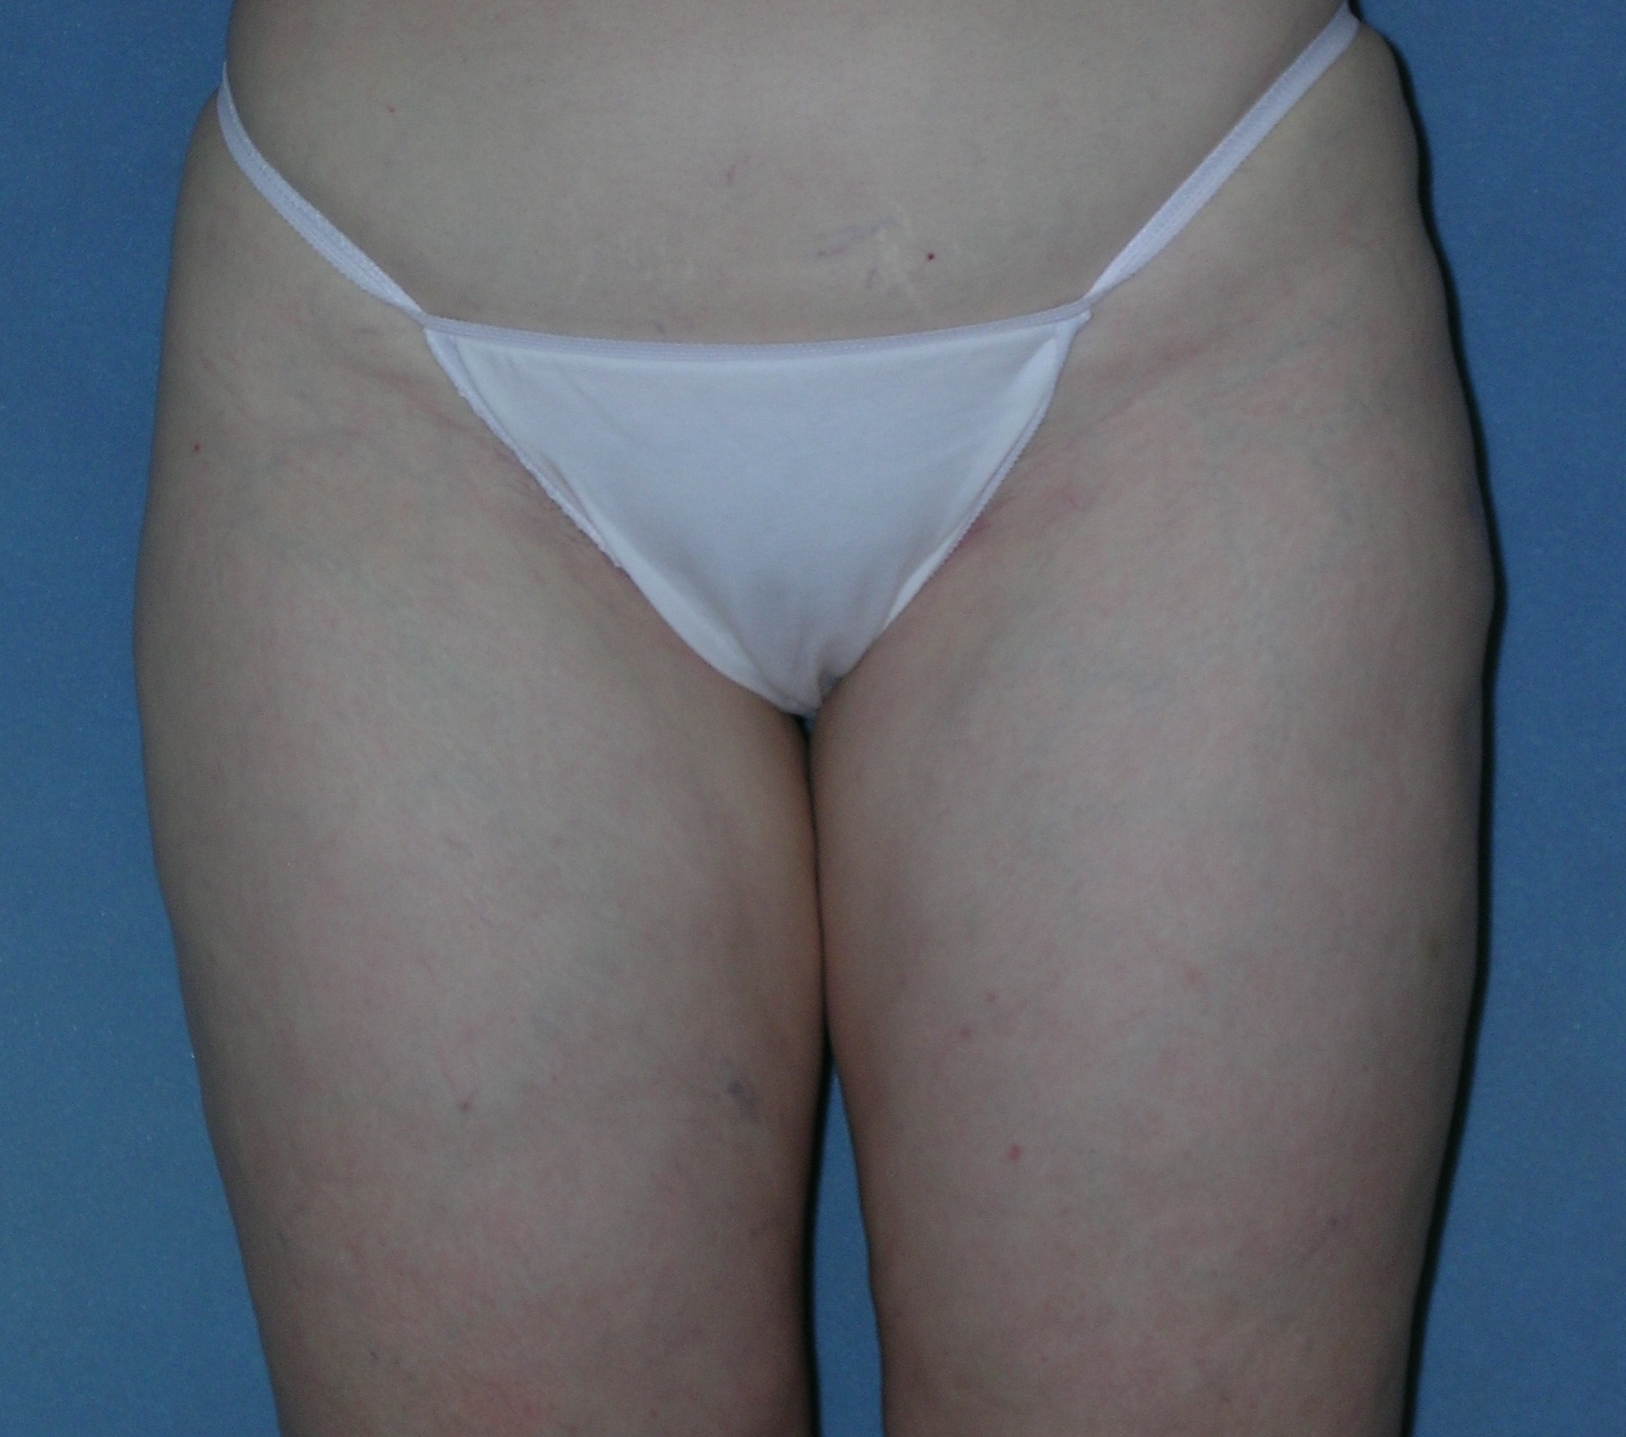 Thigh Lift Before and After Photos